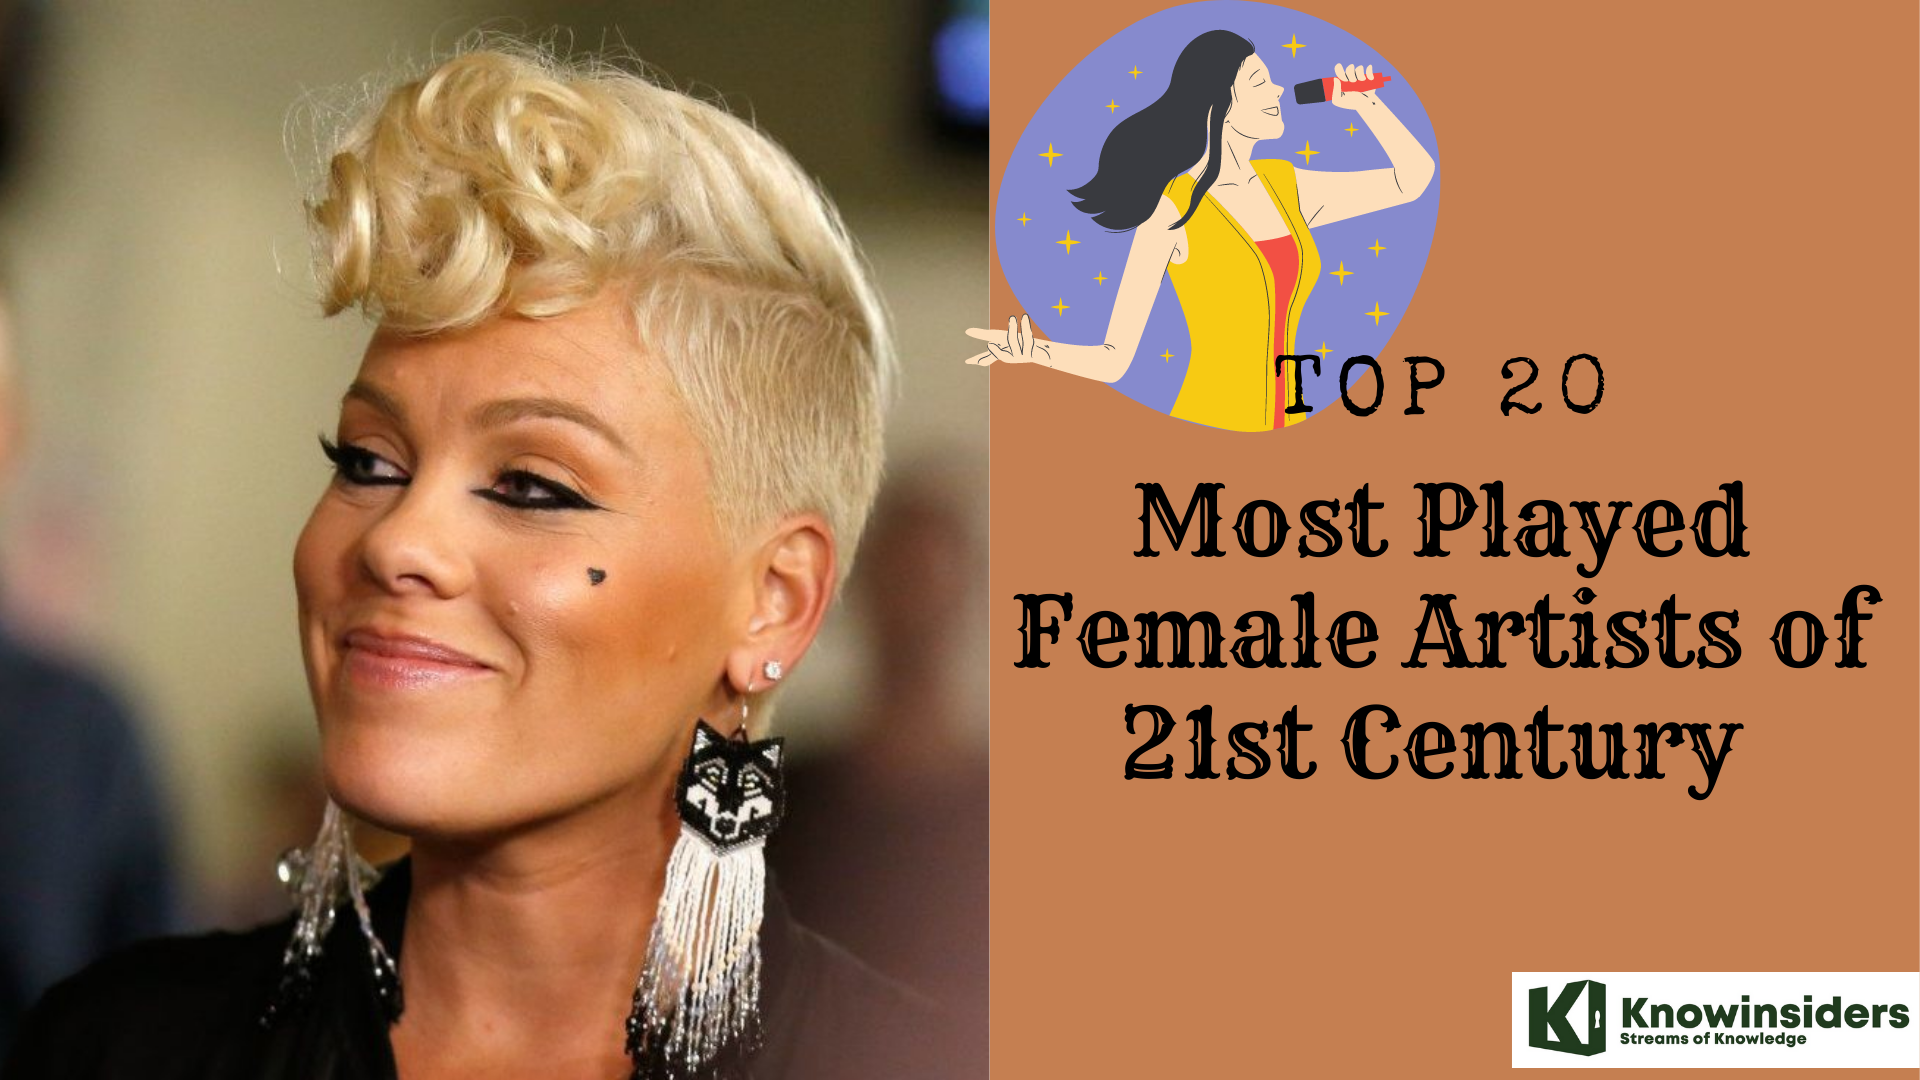 Top 20 Most Played Female Artists of The 21st Century